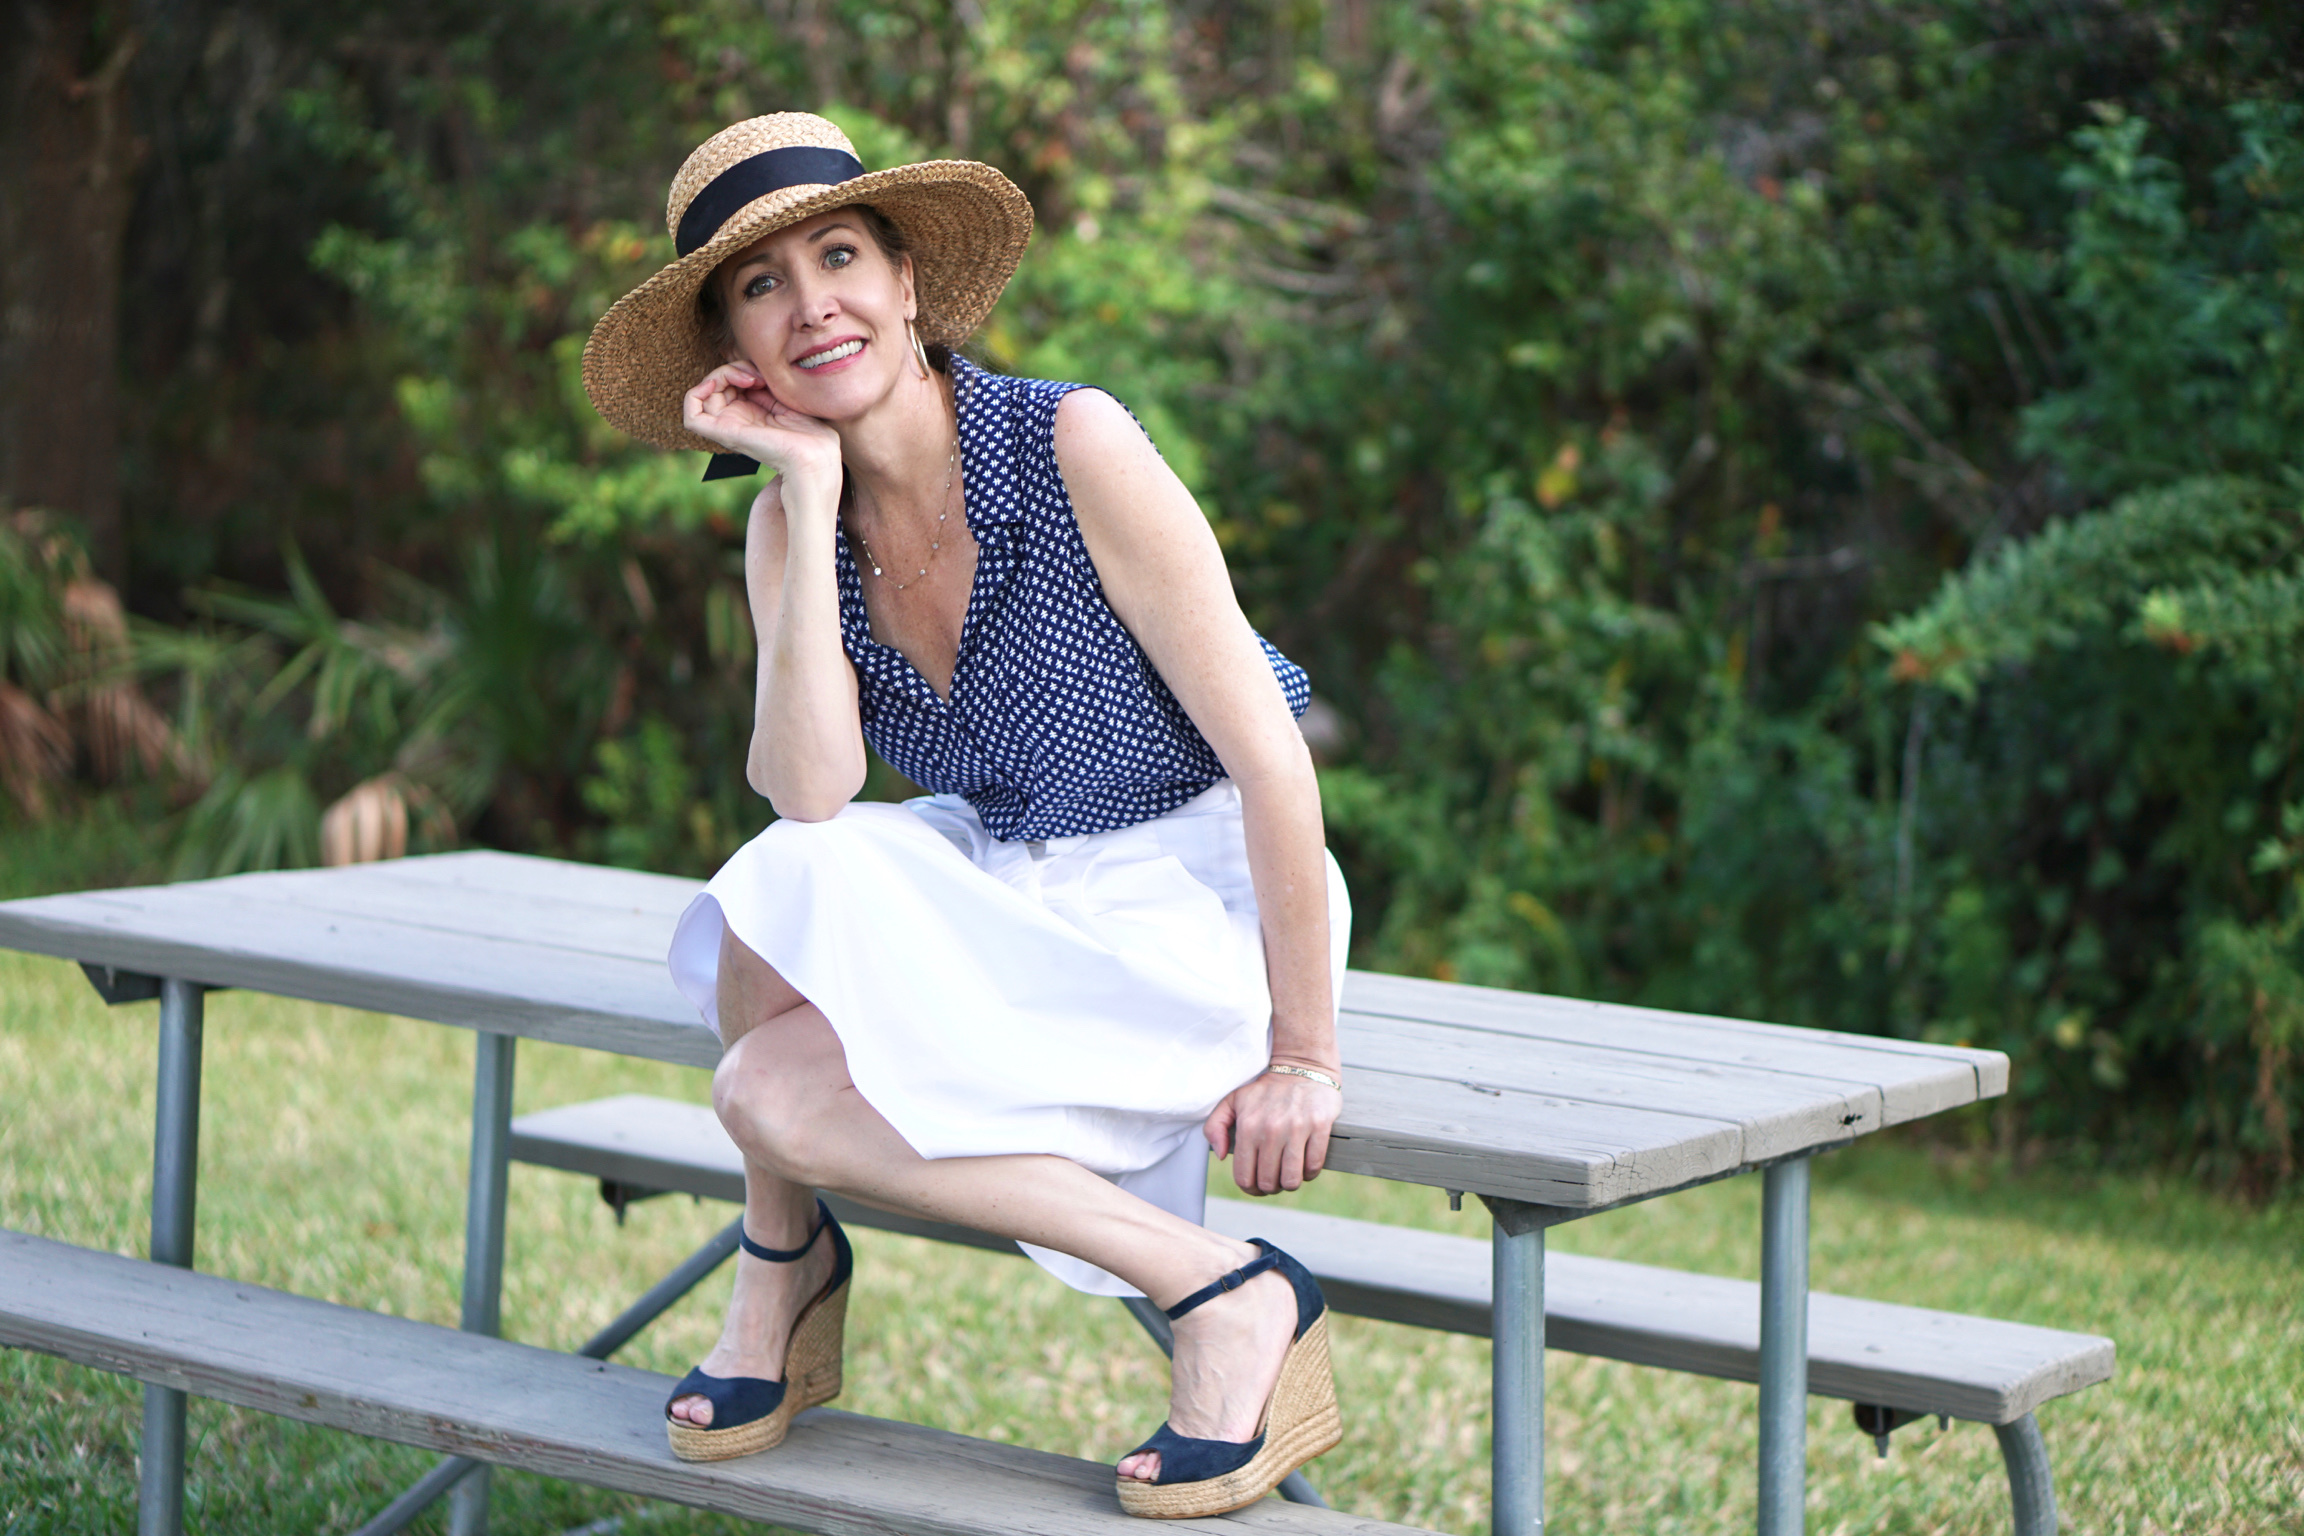 NINA ANDERS, WWW.SHARINGAJOURNEY.COM shares HER thoughts about Turning 58 Years Old. WEARING STRAW HAT, NAVY SHIRT AND WHITE SKIRT